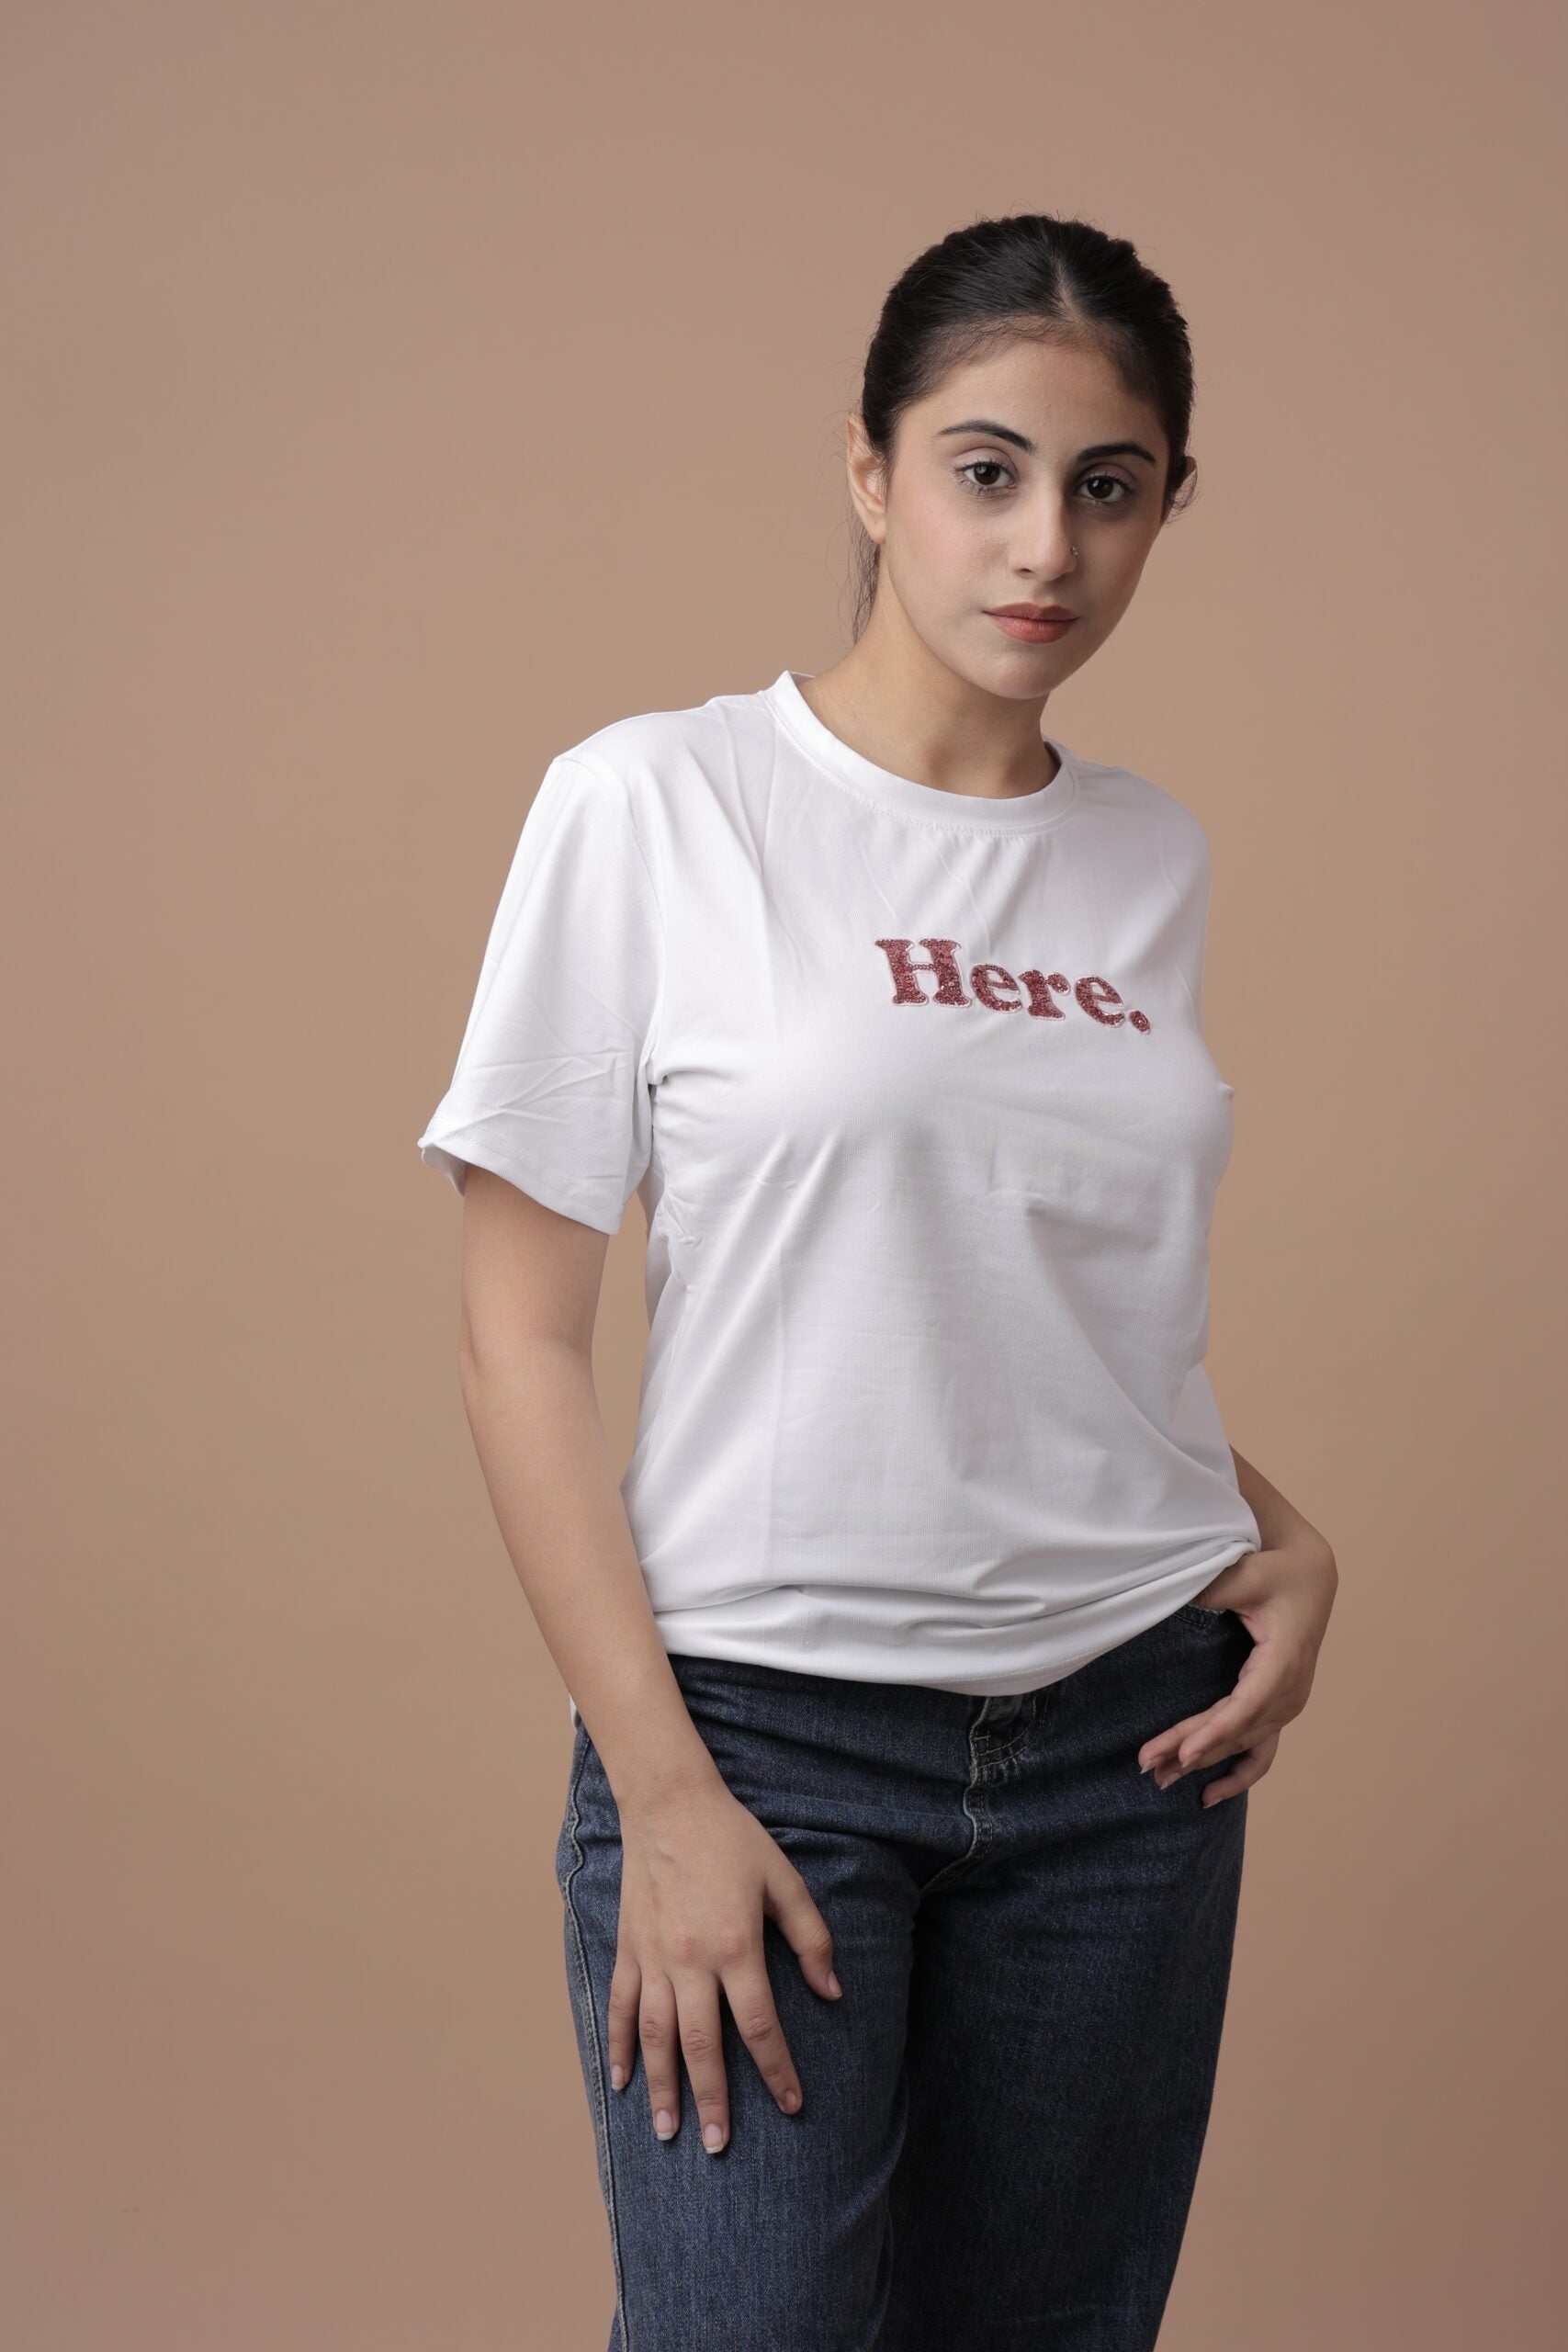 Here Tshirt (White) A Timeless Wardrobe Essential for Effortless Style!